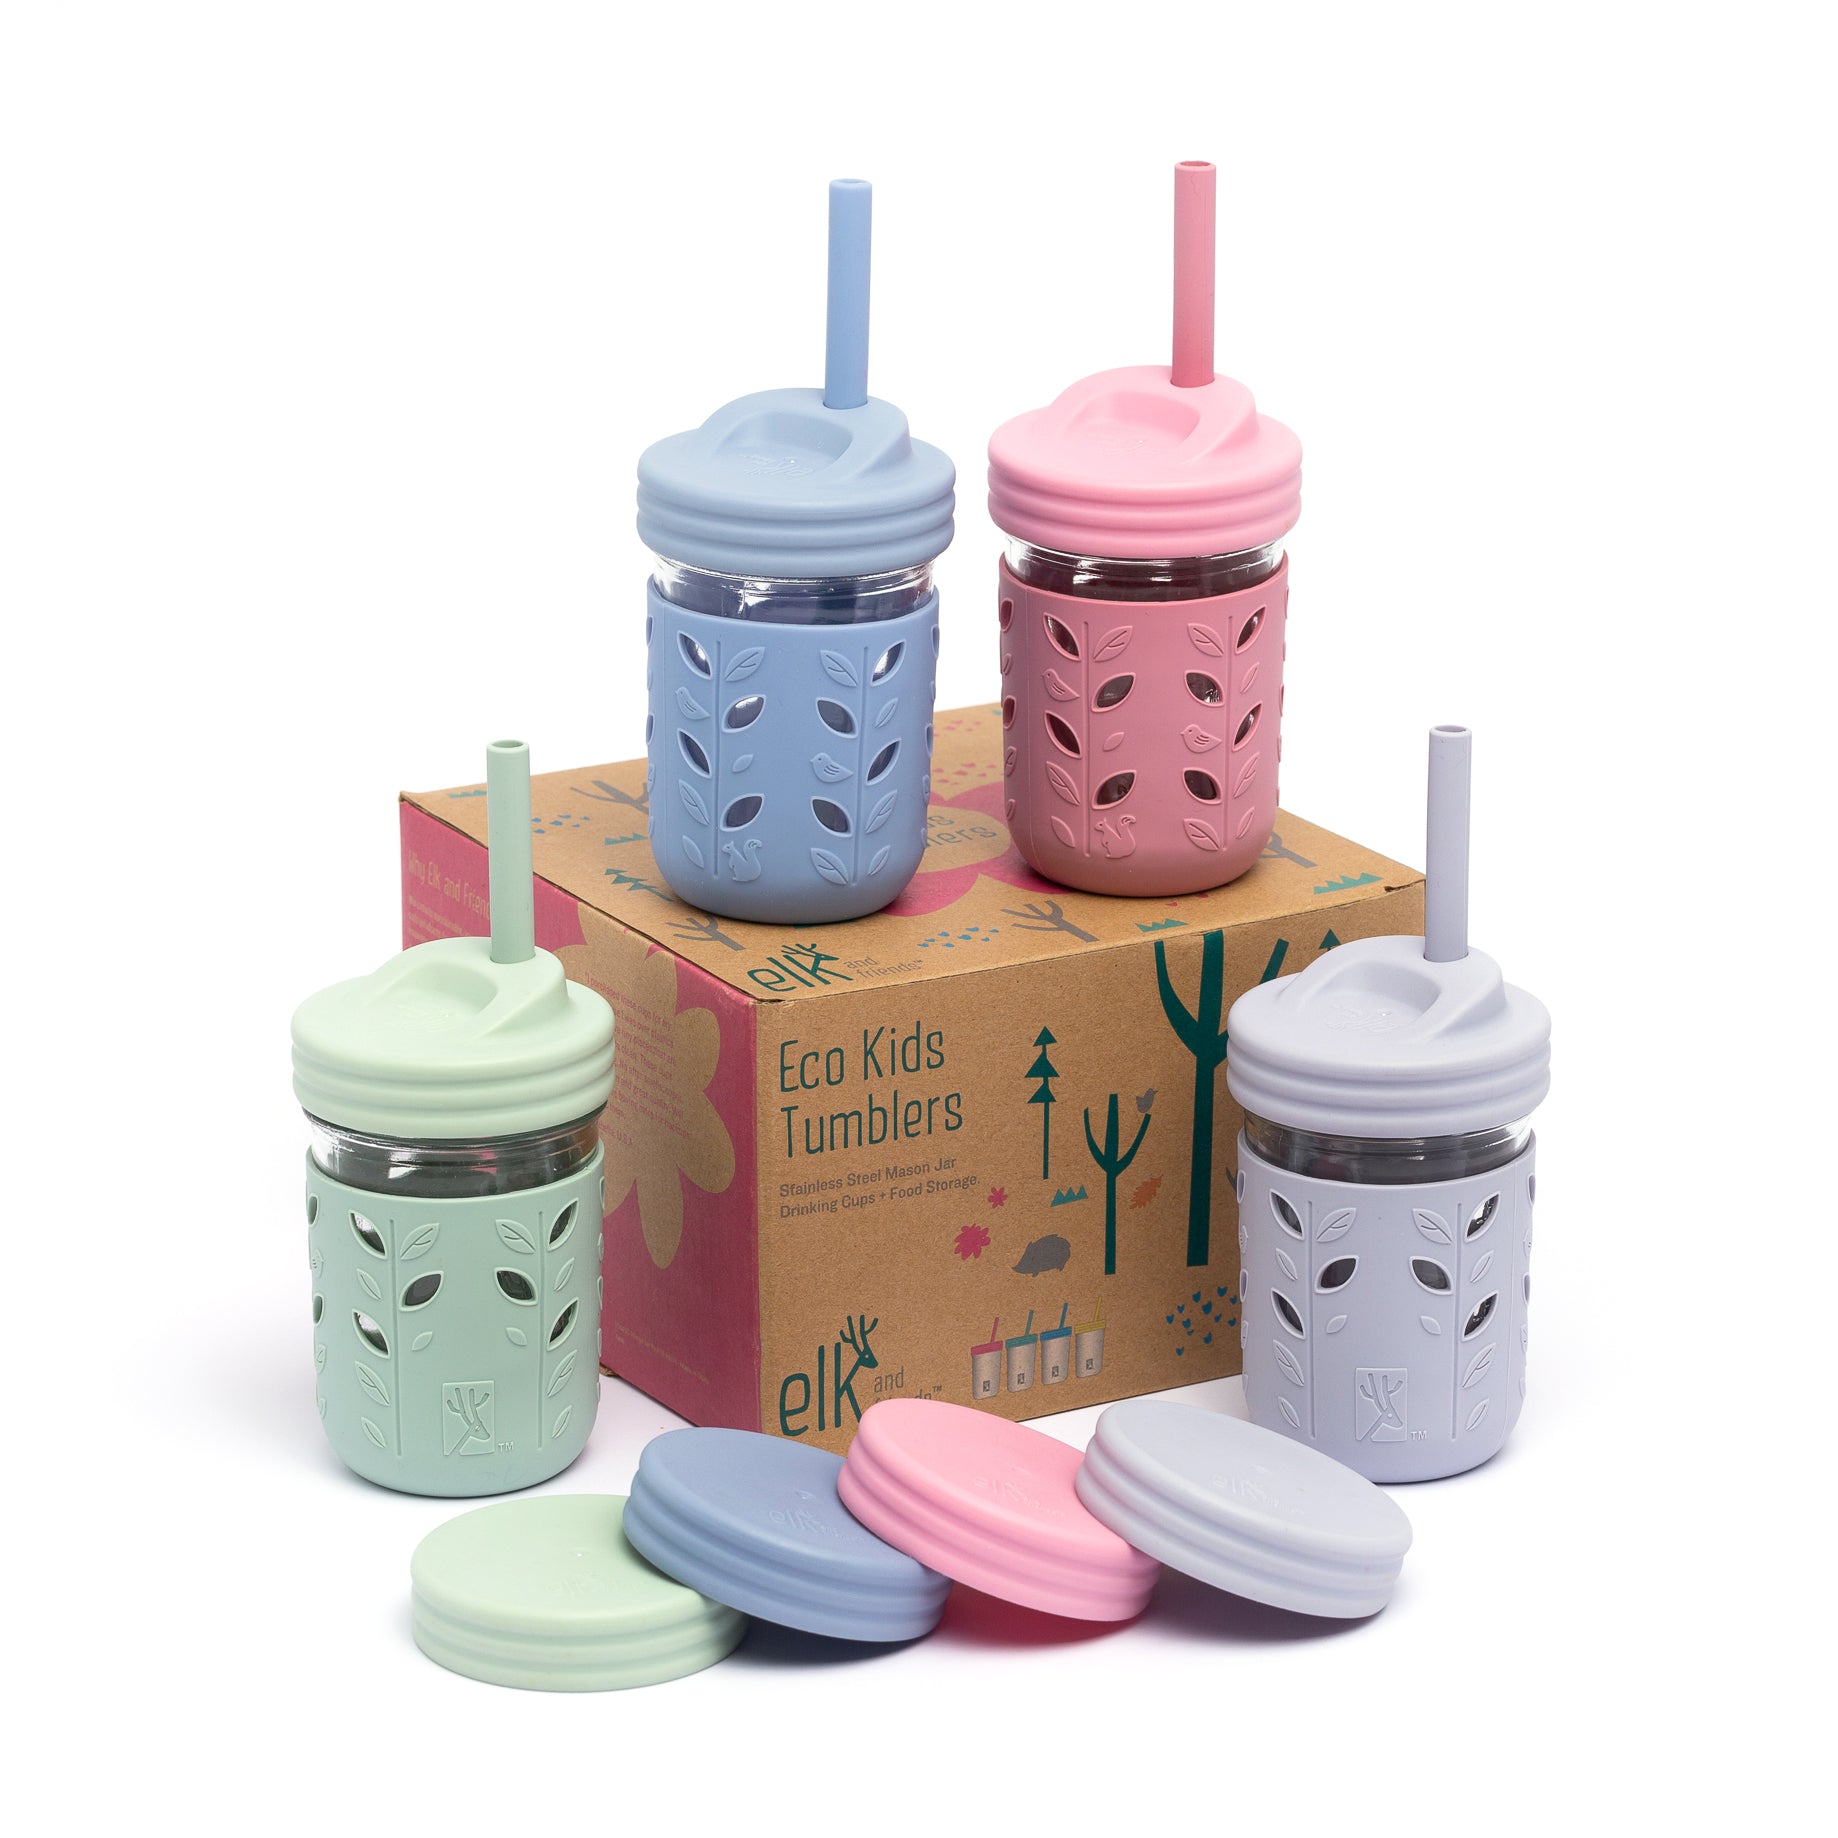 Kids Stainless Steel Cups With Silicone Lids & Straws, Kids